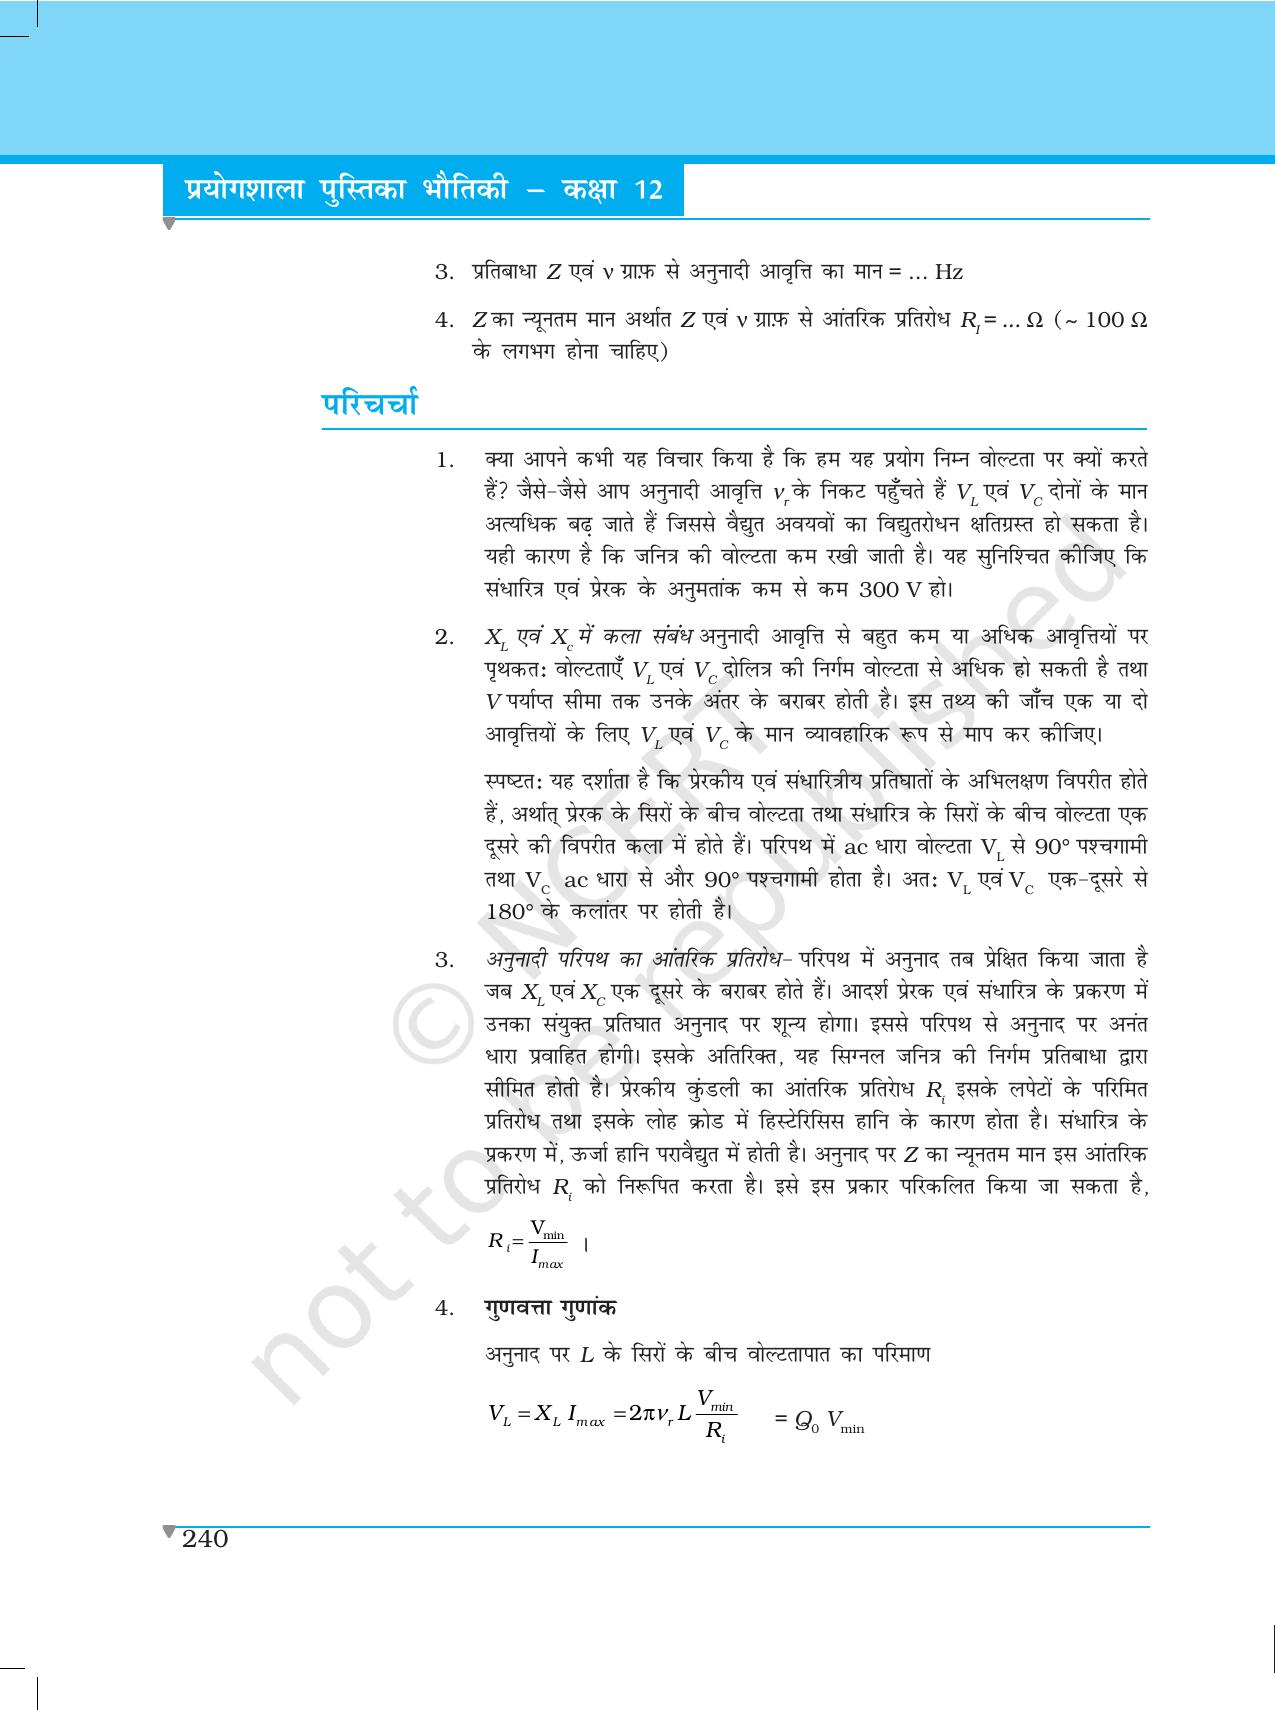 NCERT Laboratory Manuals for Class XII भौतिकी - परियोजना (1 - 7) - Page 34